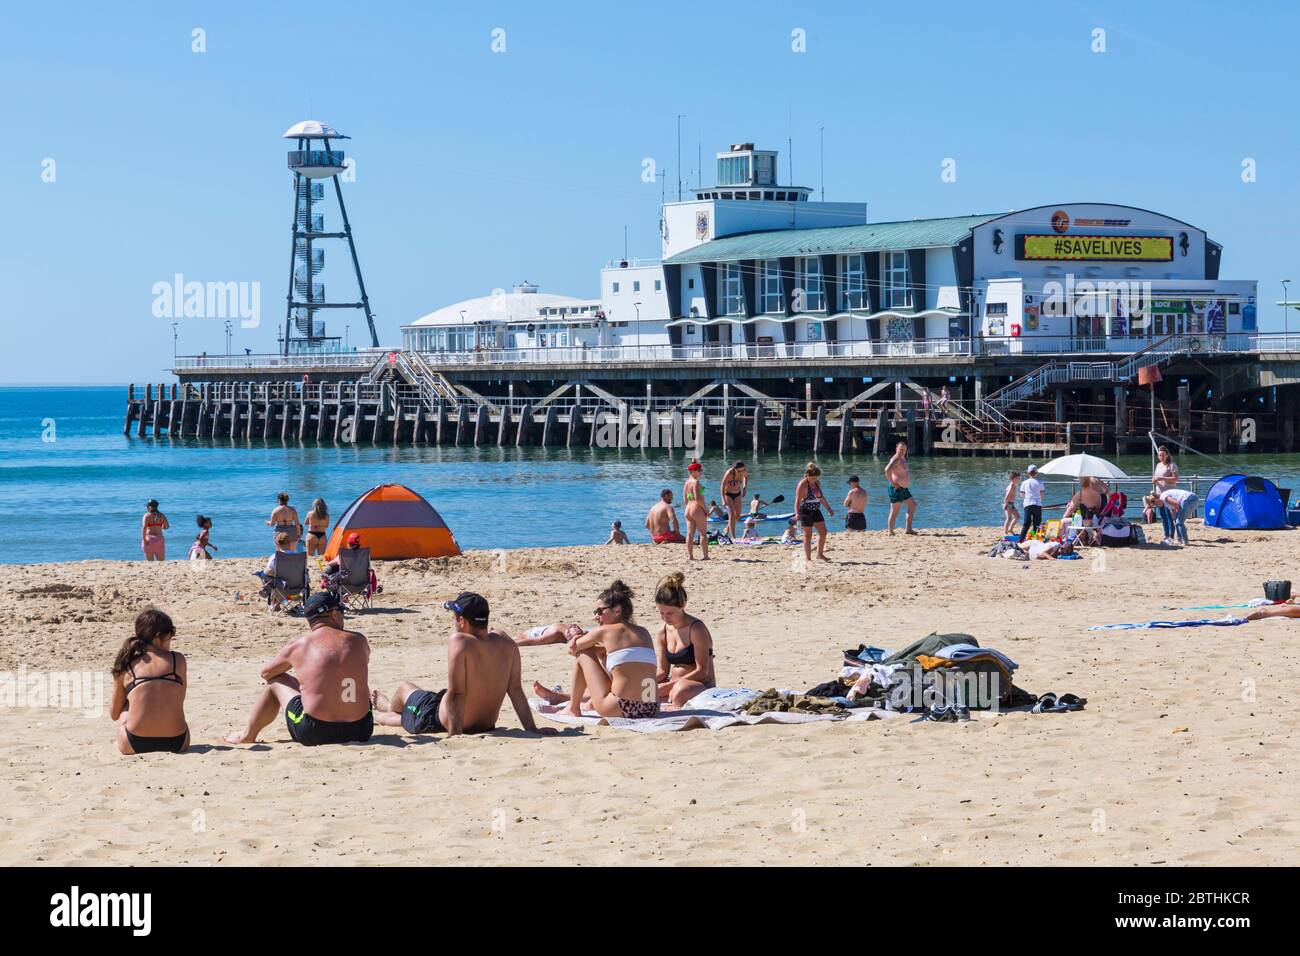 Bournemouth, Dorset UK. 26th May 2020. UK weather: another hot sunny day at Bournemouth beaches with clear blue skies and unbroken sunshine, as the glorious weather continues and temperatures rise. Sunseekers head to the seaside to enjoy the sunshine. Credit: Carolyn Jenkins/Alamy Live News Stock Photo